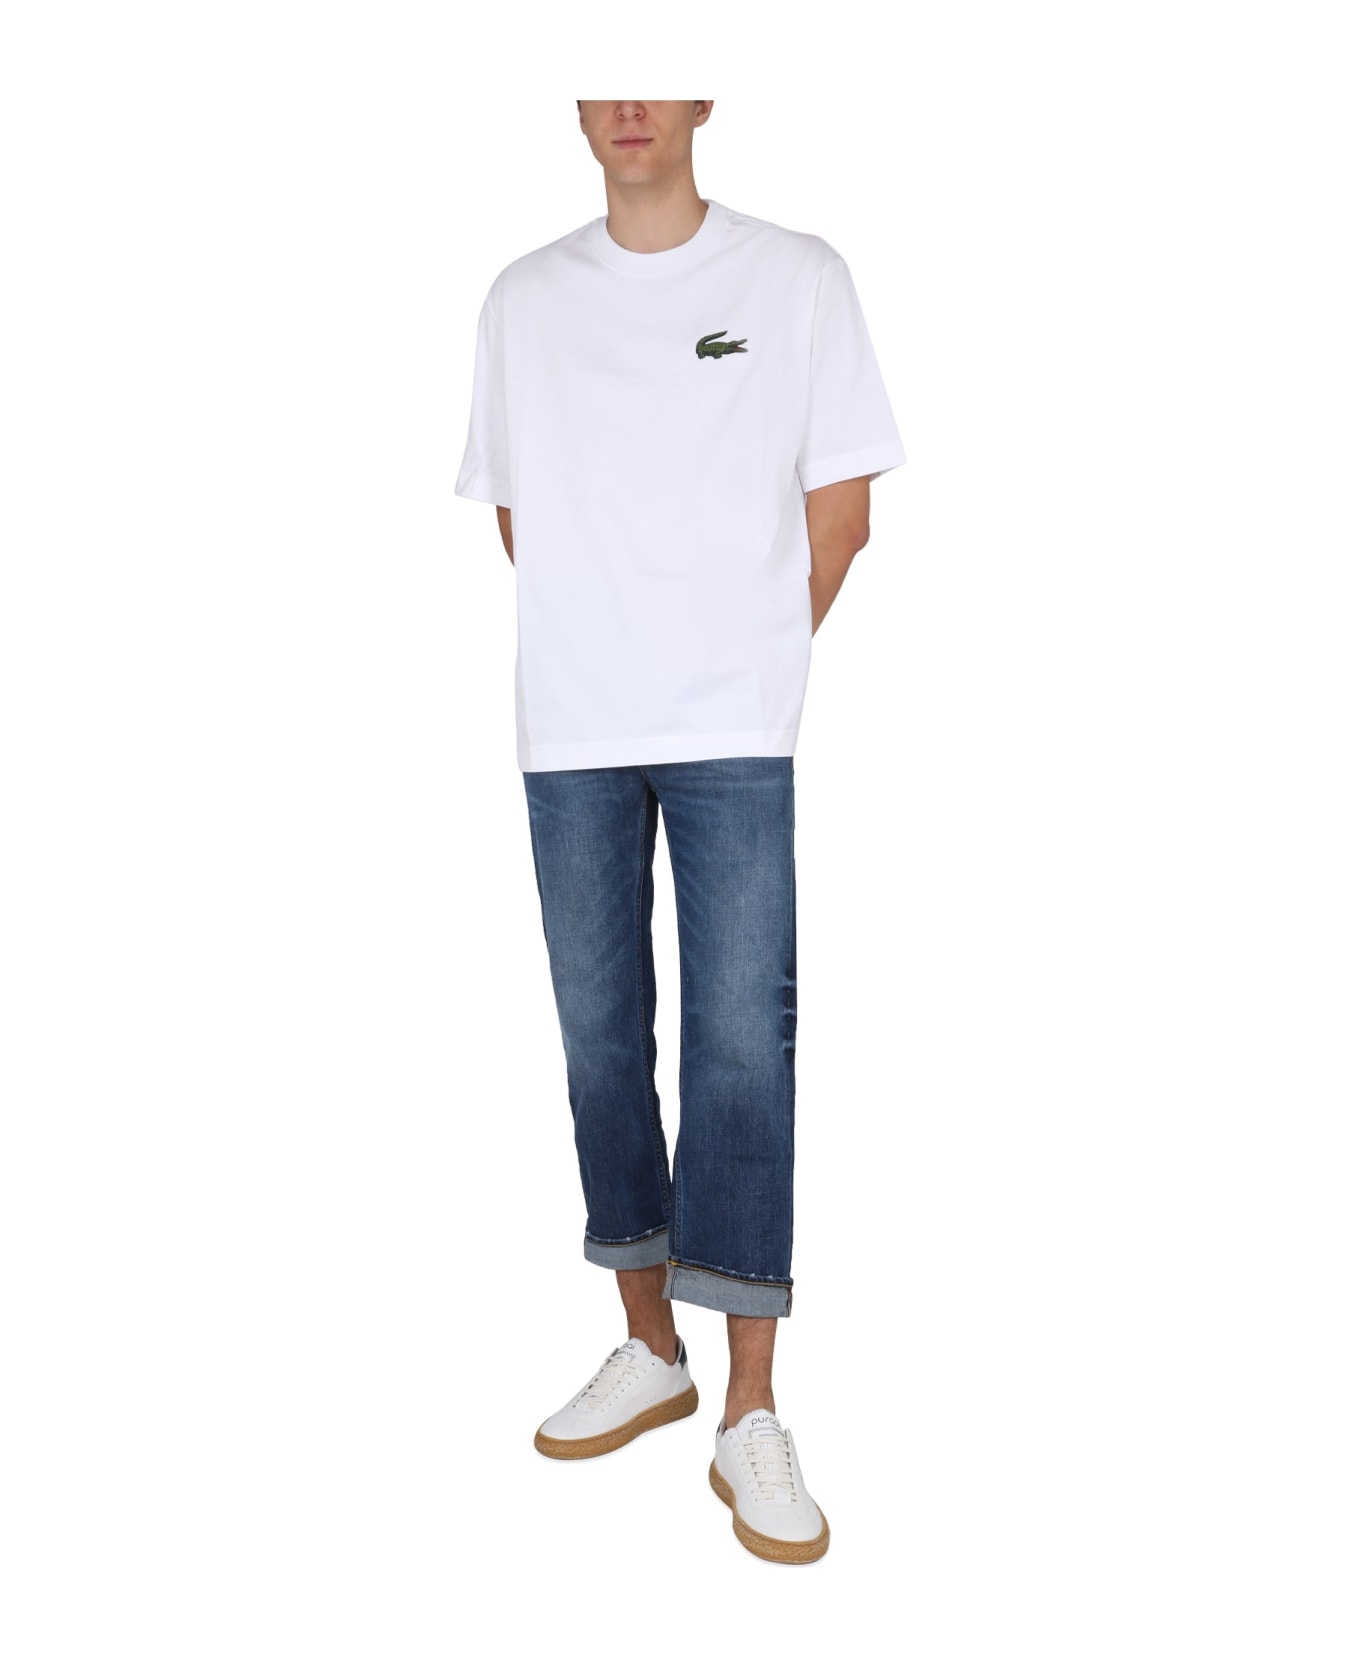 Lacoste T-shirt With Logo Lacoste シャツ